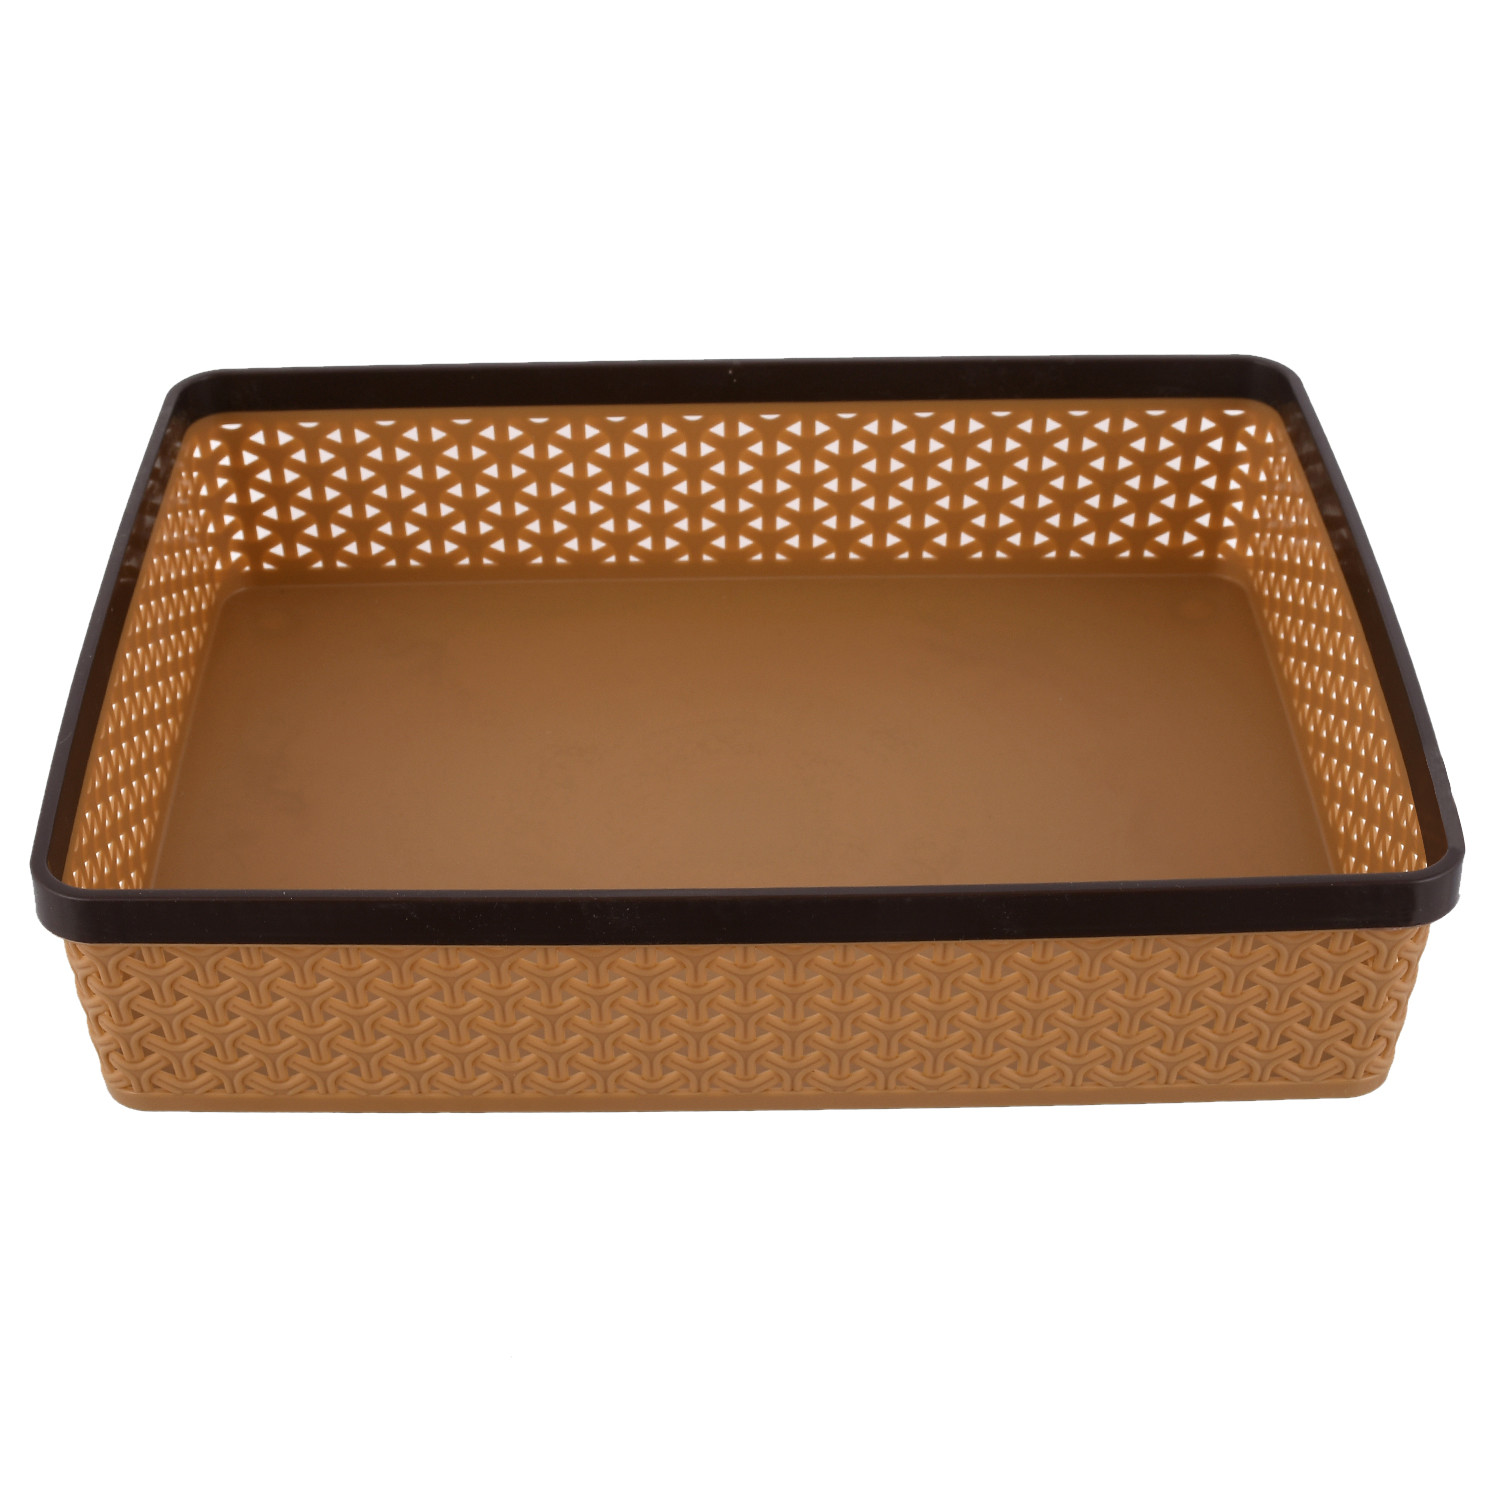 Kuber Industries Plastic Solitaire Stationary Office Tray, File Tray, Document Tray, Paper Tray A4 Documents/Papers/Letters/folders Holder Desk Organizer (Brown)